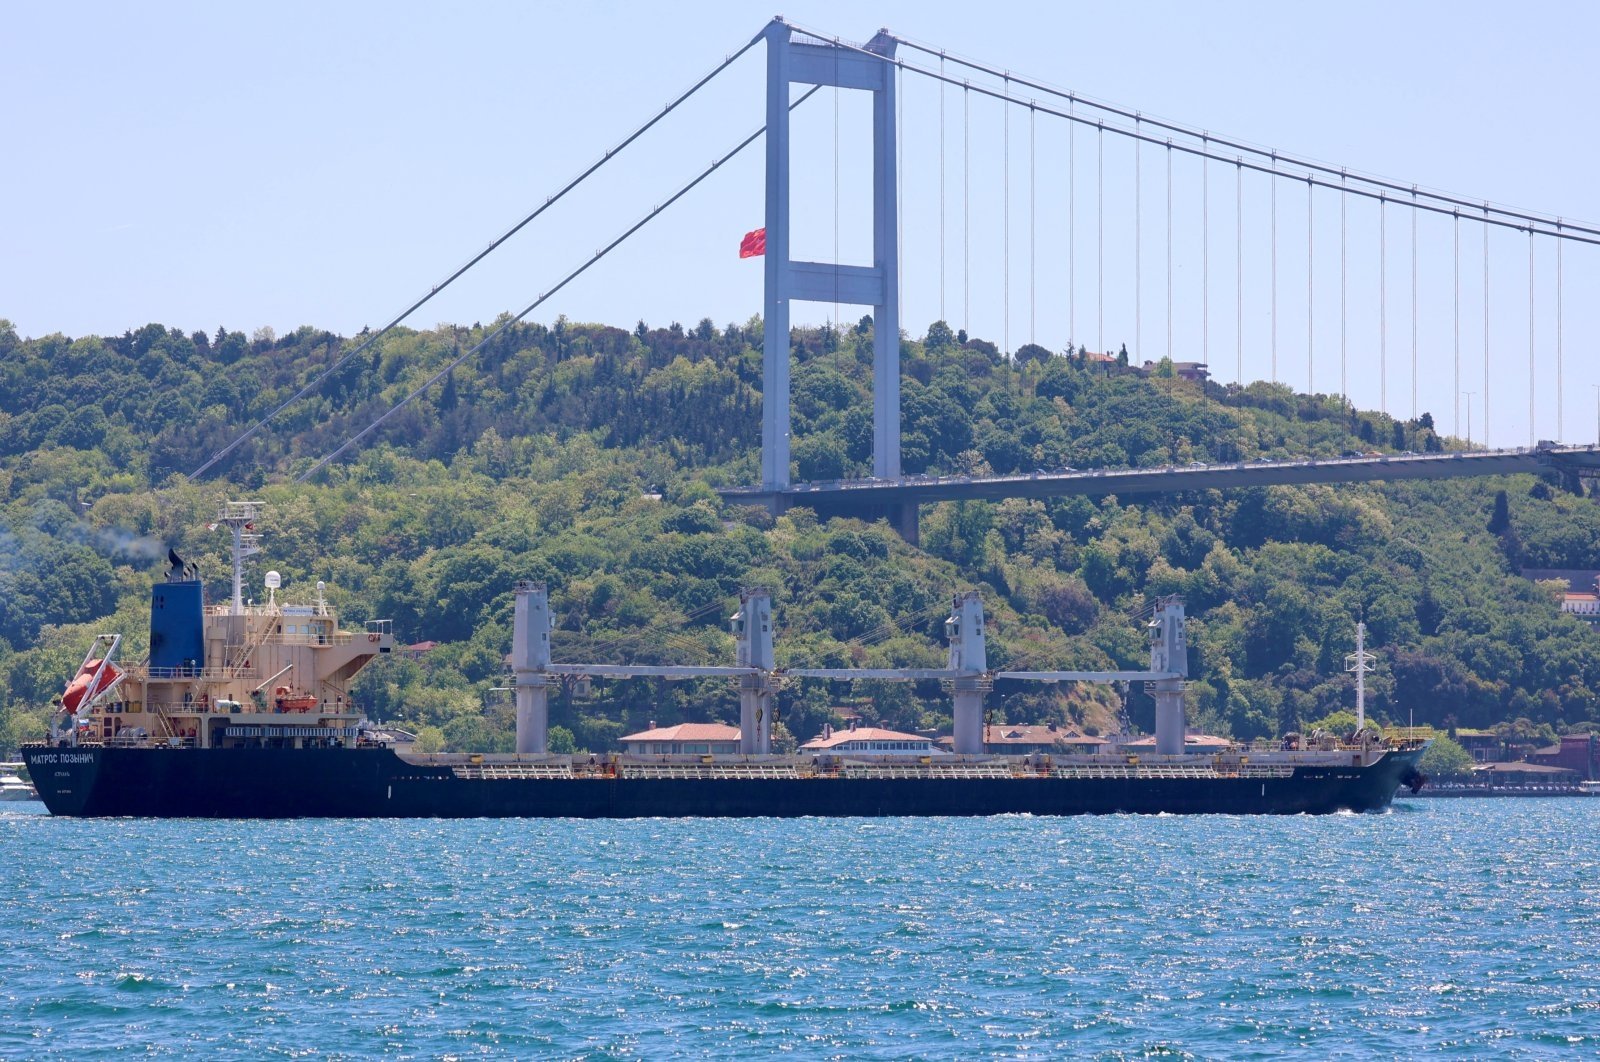 Russian-flagged bulk carrier Matros Pozynich sails in the Bosporus, on its way to the Mediterranean Sea, in Istanbul, Türkiye, May 22, 2022. (Reuters Photo)